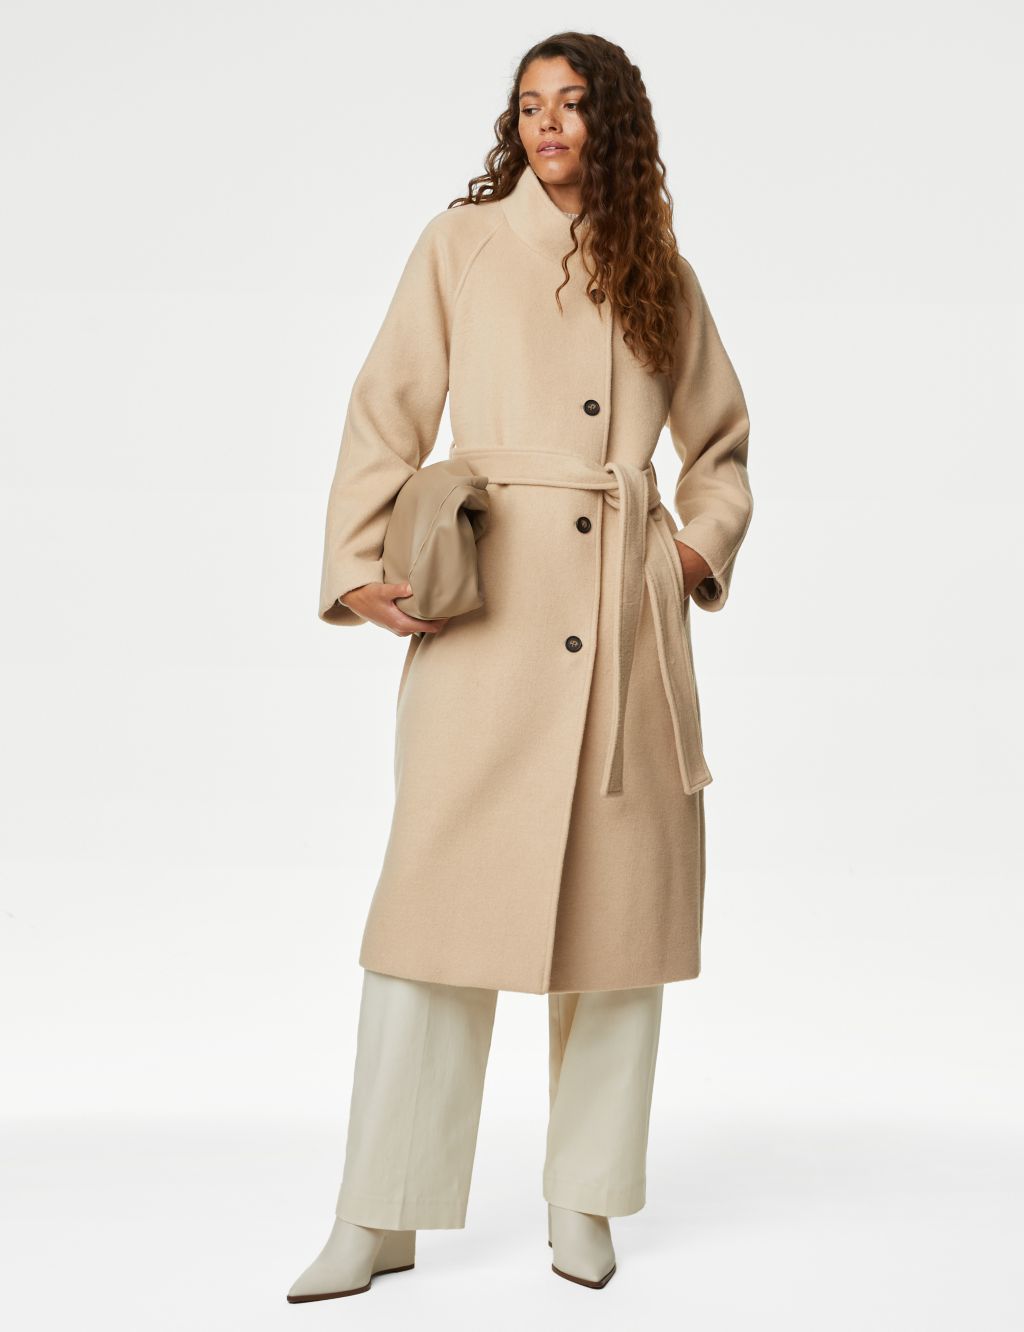 Belted Funnel Neck Wrap Coat with Wool image 1